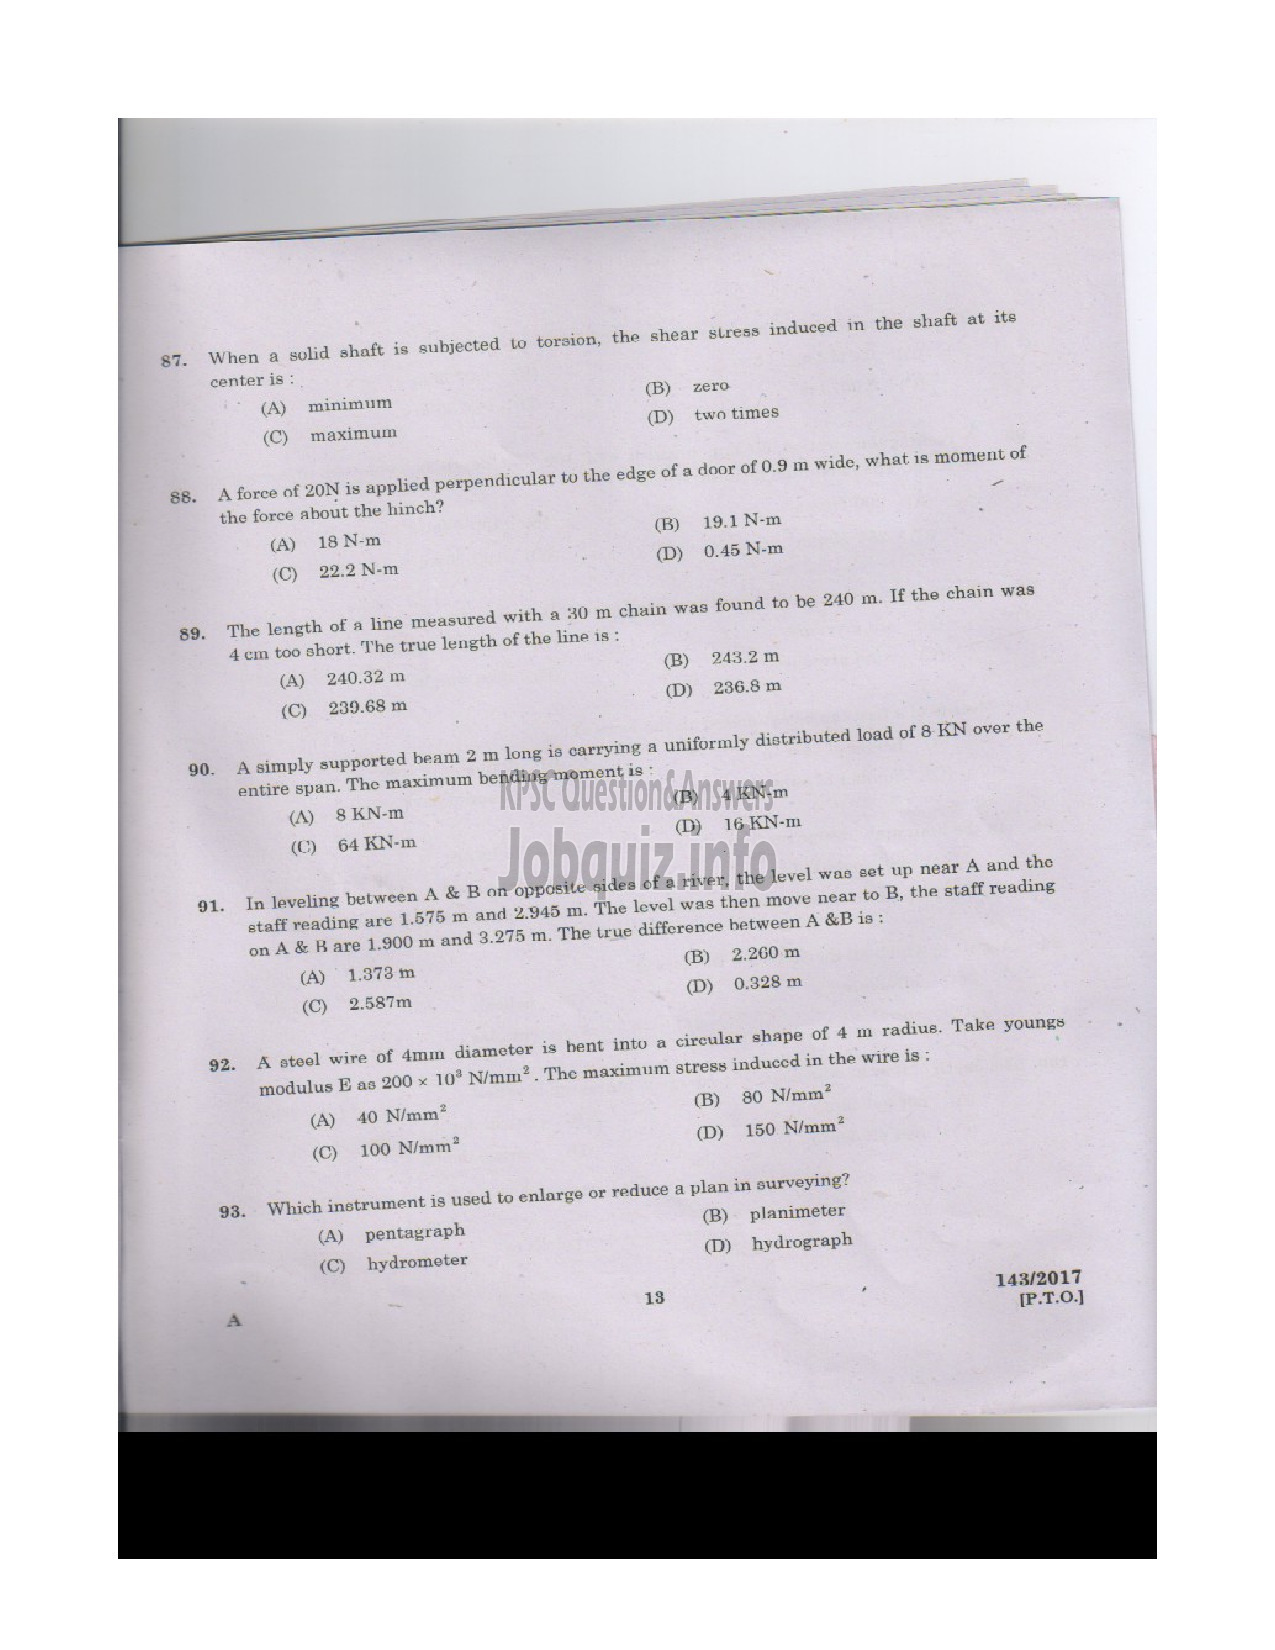 Kerala PSC Question Paper - VOCATIONAL INSTRUCTOR IN CIVIL CONSTRUCTION ANDMAINTENANCE VOCATIONAL HIGHER SECONDARY-12